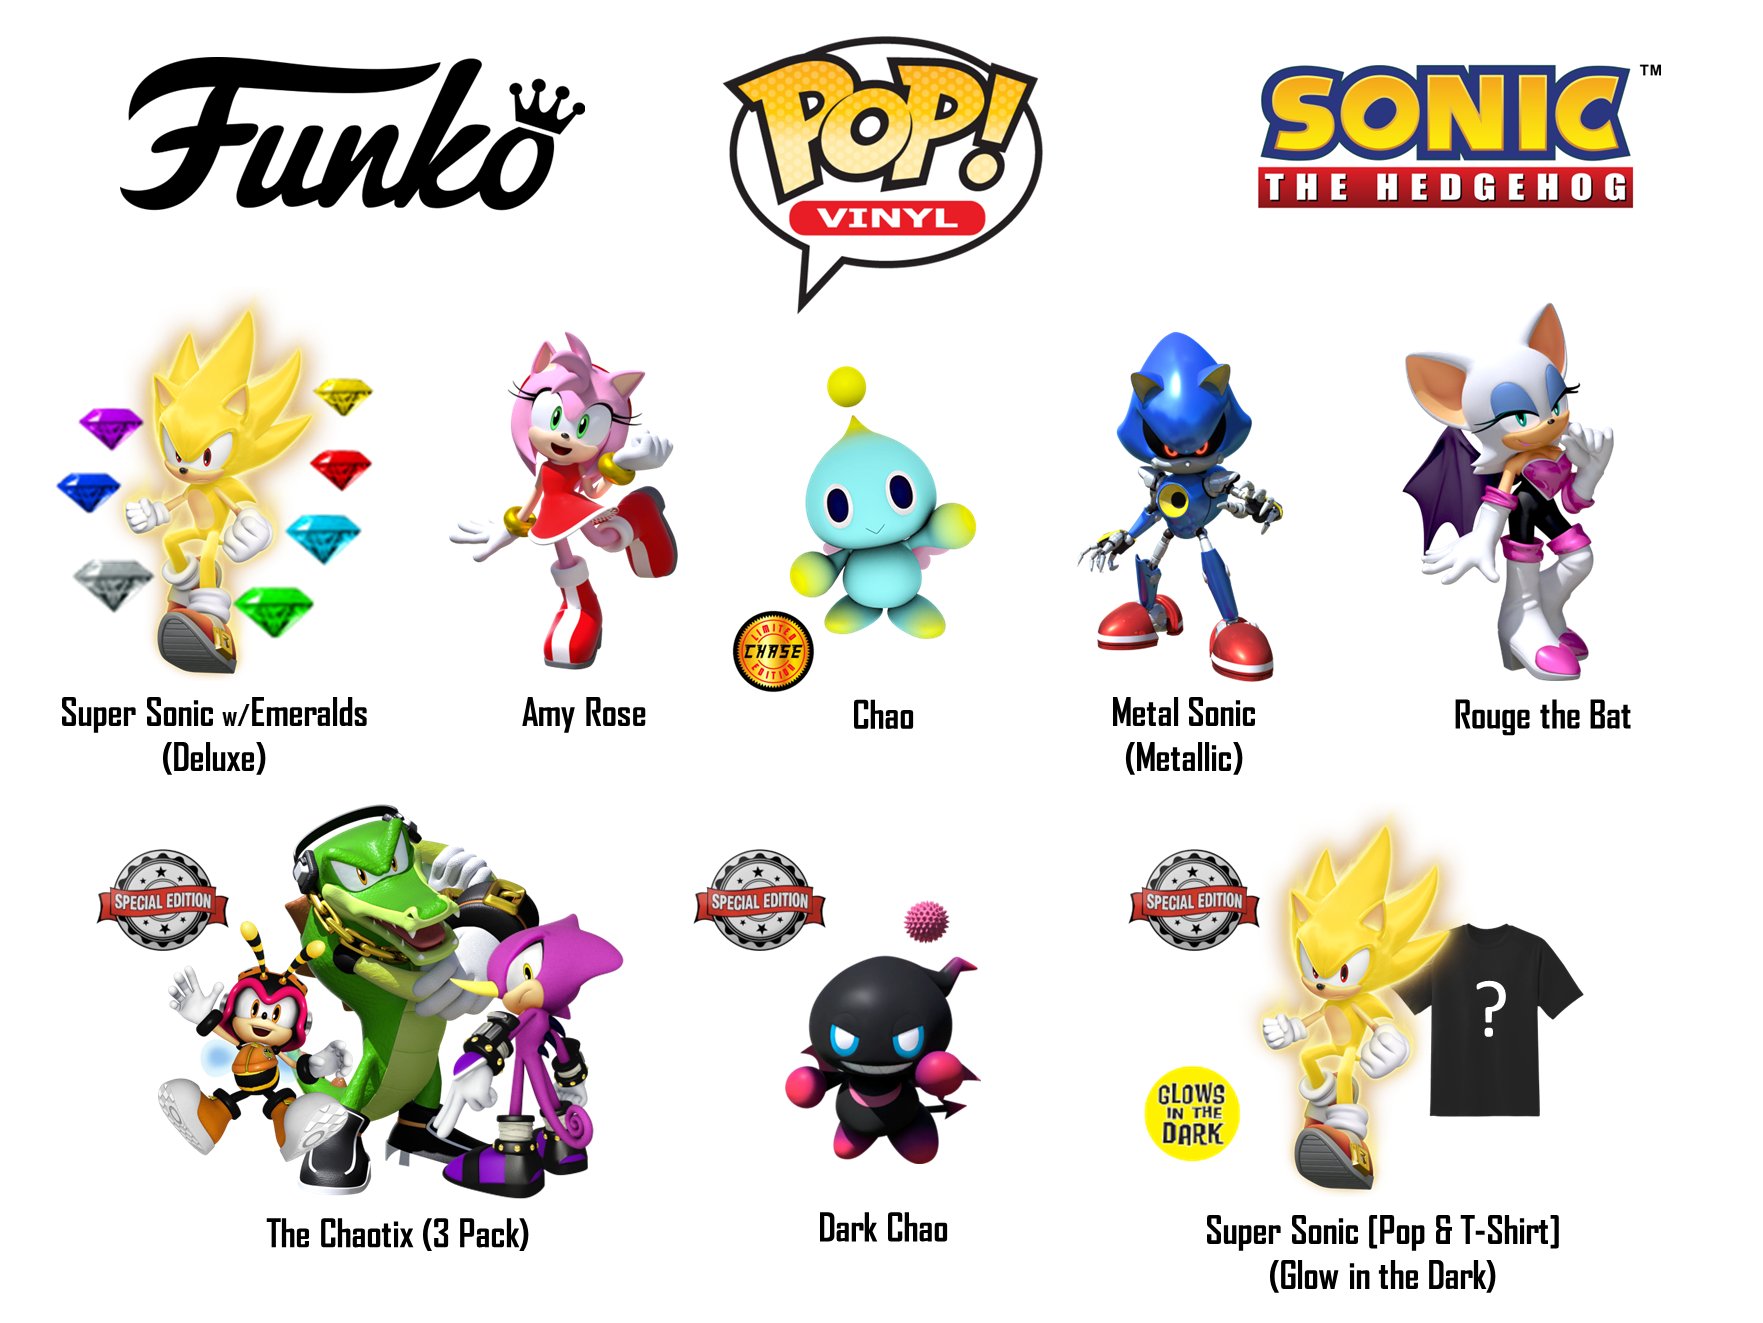 Sonic Merch News on X: NEW Sonic Funko Pops may be coming!! Several  reliable Funko leakers have reported that we maybe getting new Sonic Pops,  no word on release dates yet. These